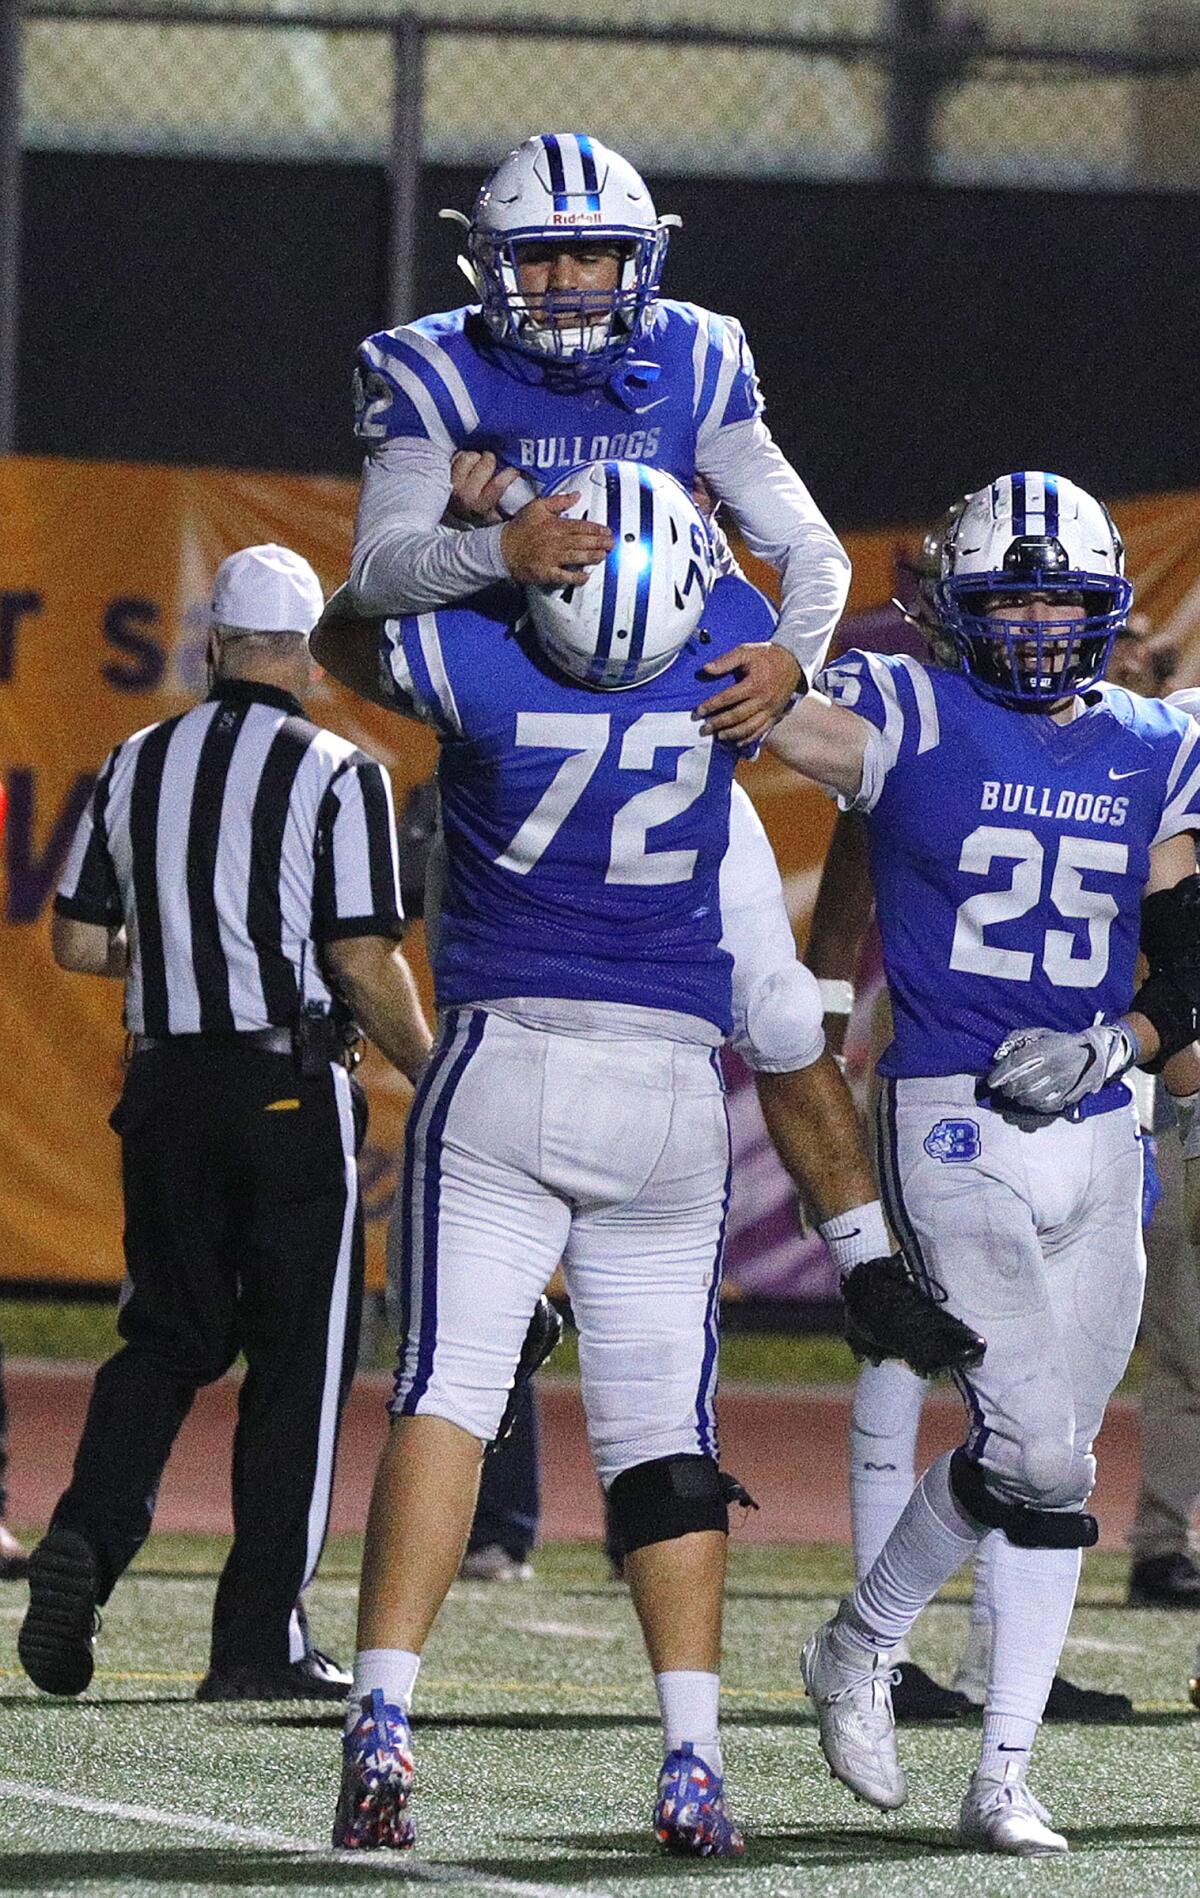 Burbank's Max Mendieta, who sacked the Muir quarterback, is hoisted into the air to celebrate by teammate Craig Rushton in a Pacific League football game at Burroughs High School on Monday, October 14, 2019.